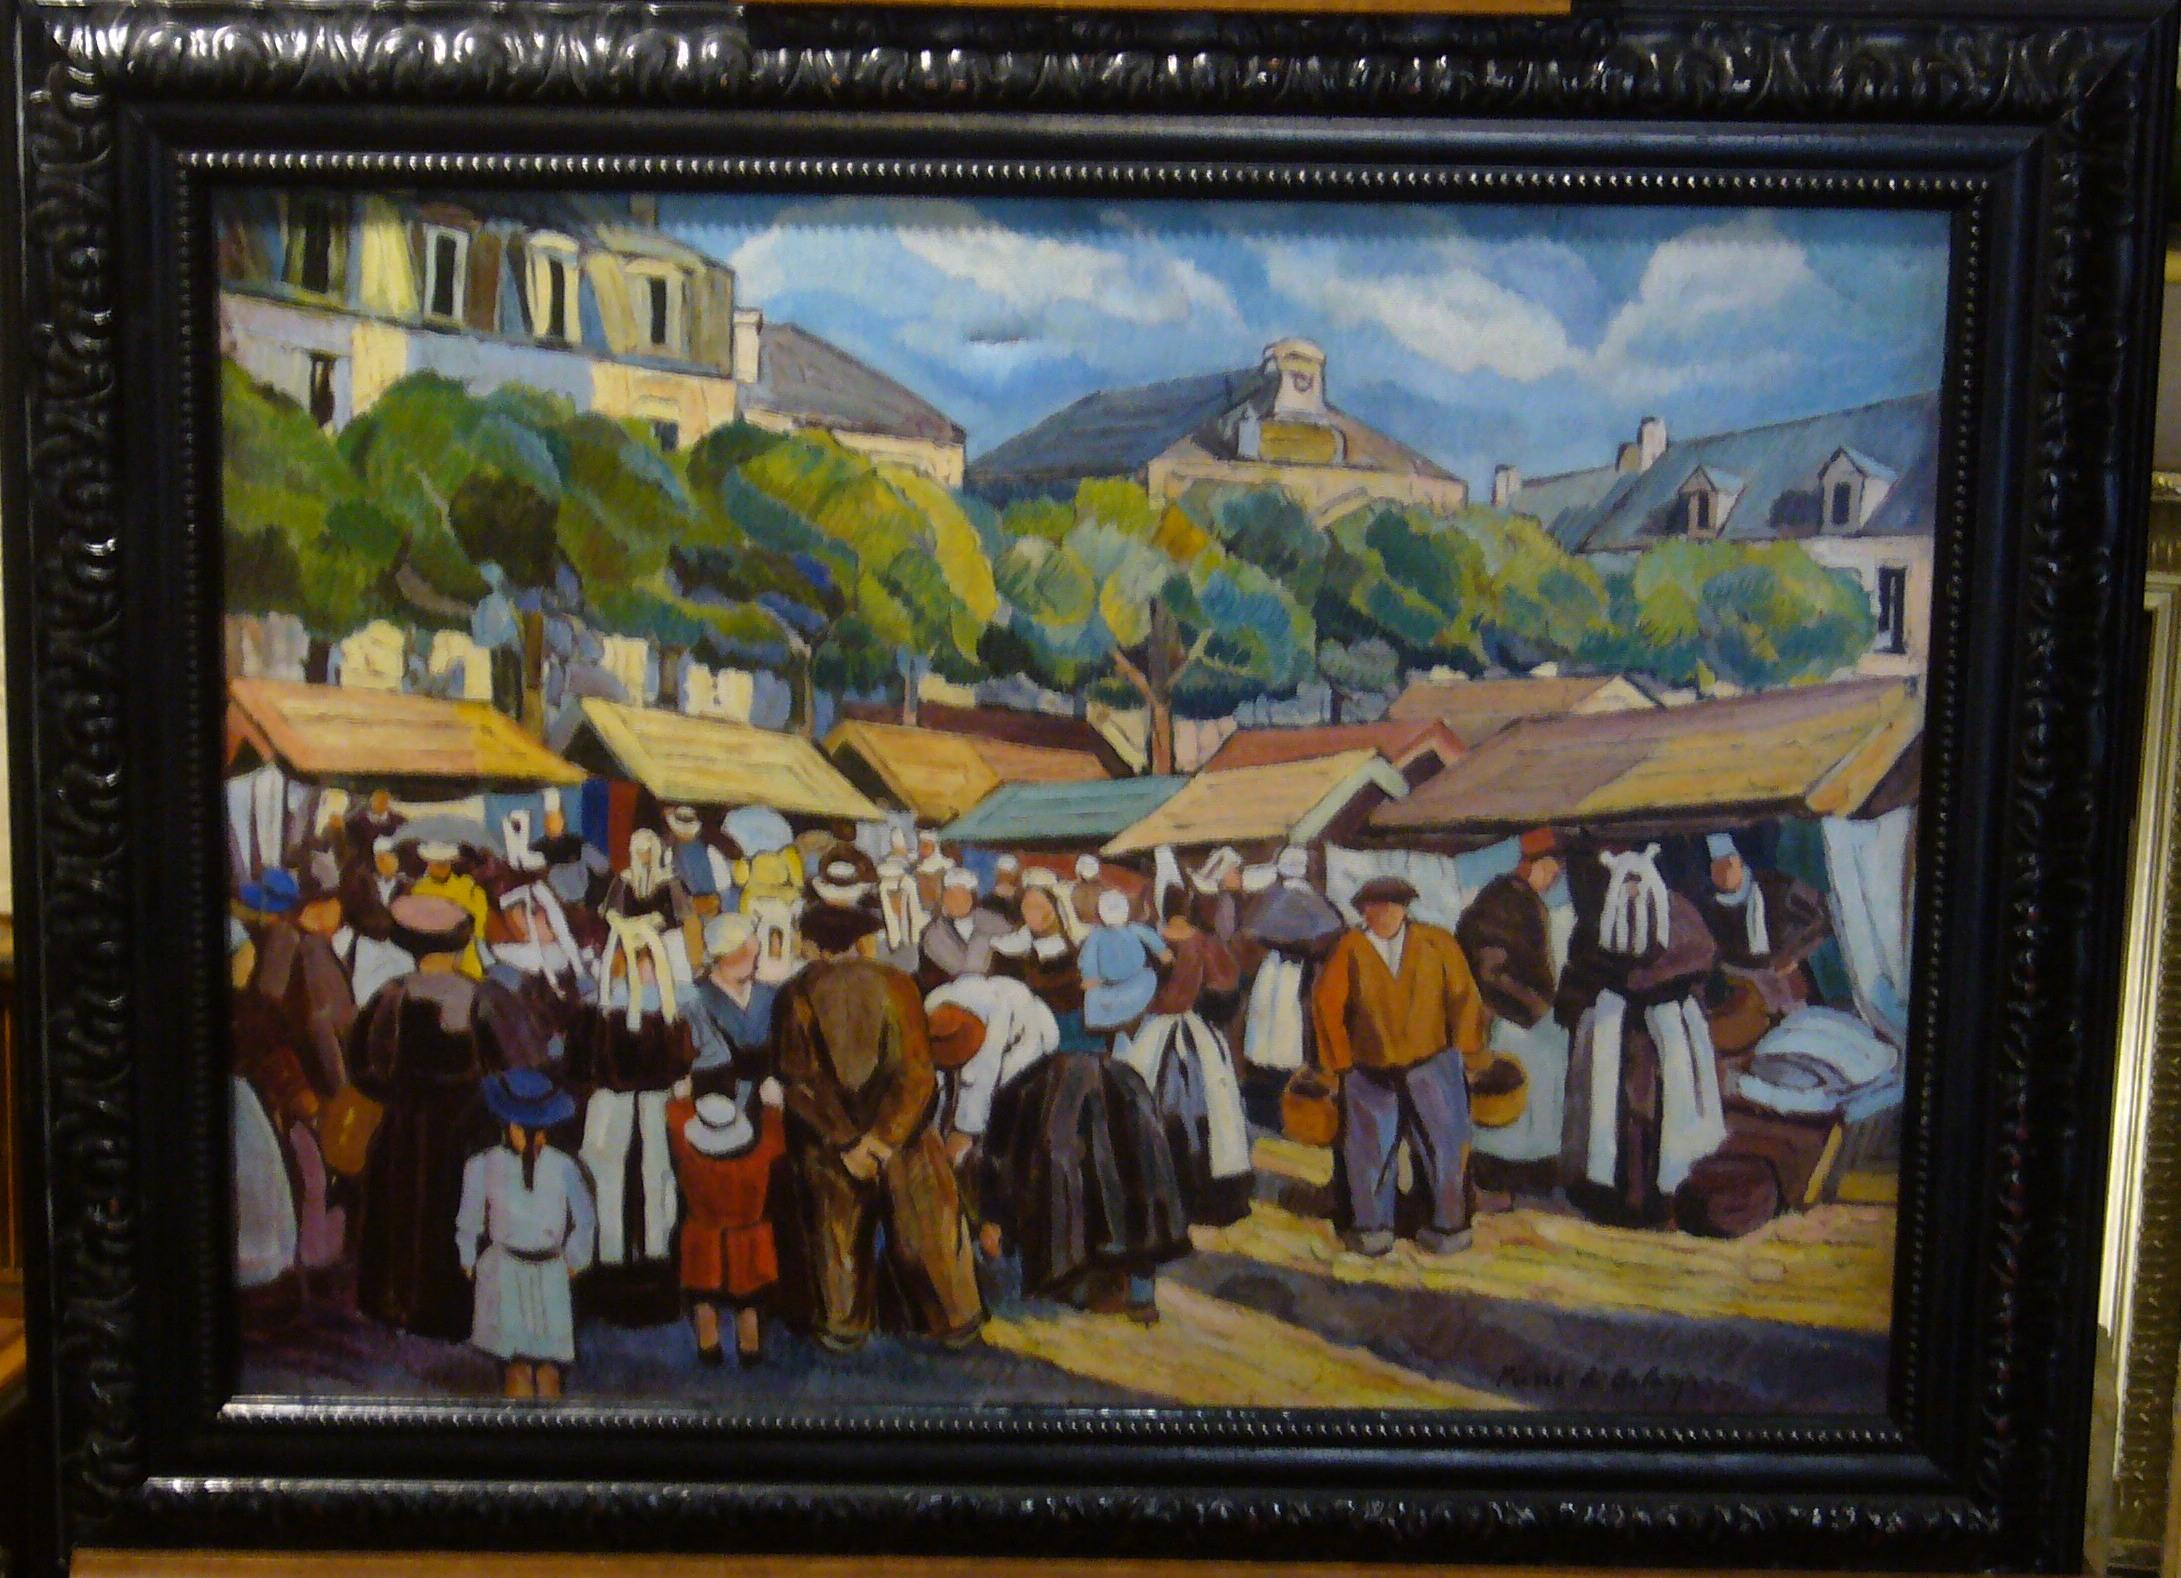 The breton market - Painting by Pierre de Bealy